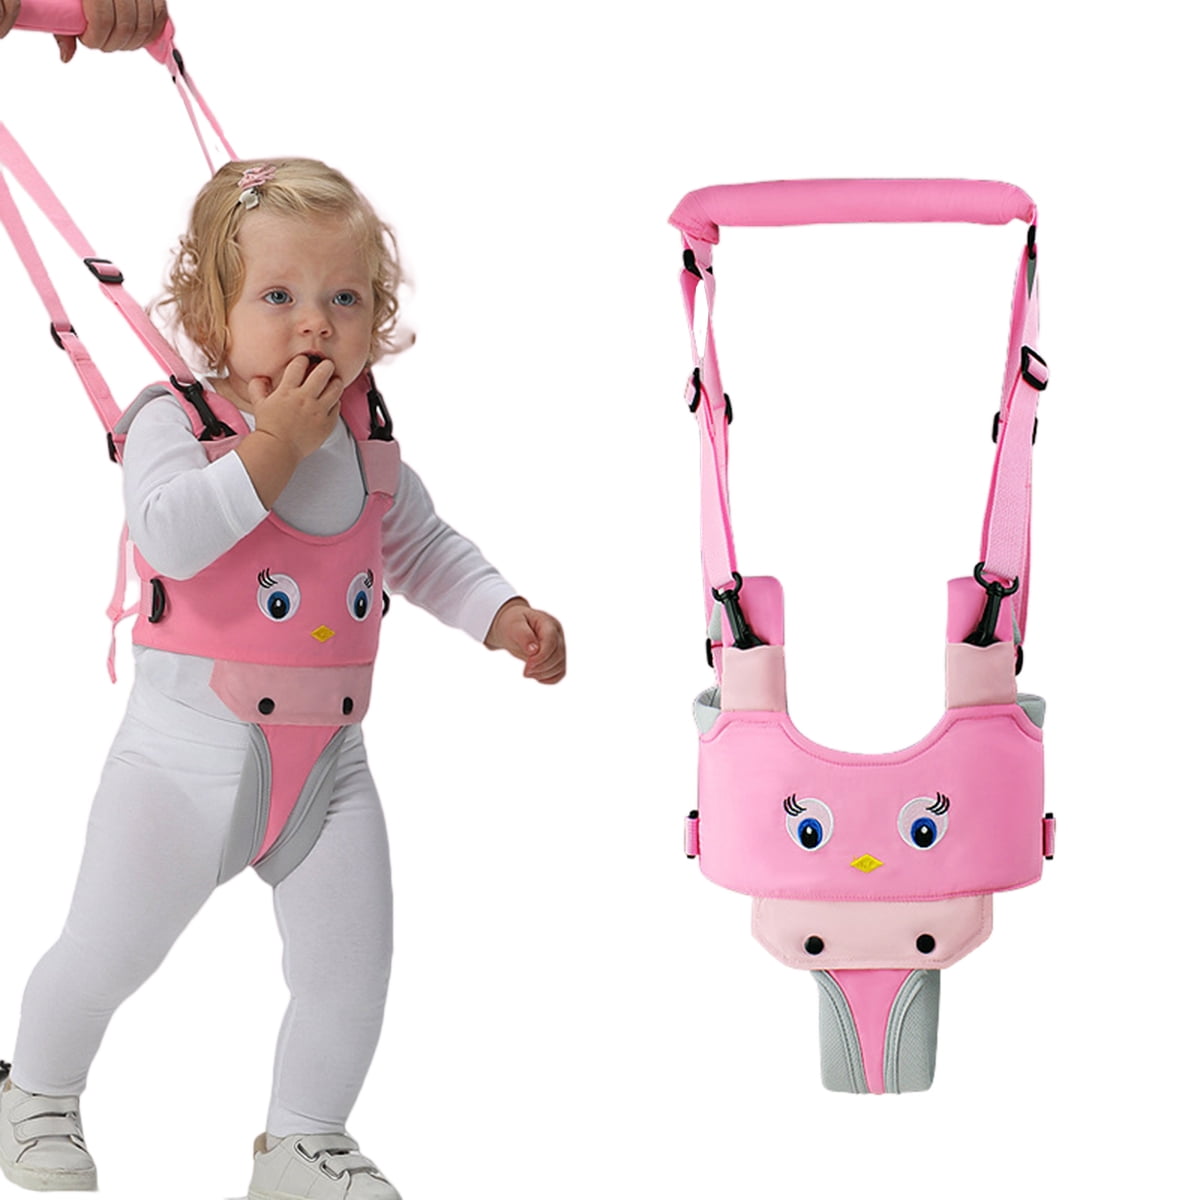 NABLUE Hand-held Baby Walker Stand Up and Walking Learning Helper for Baby Protective Belt Child Harnesses Learning Assistant Belt Adjustable Baby Walking Harness Safety Harnesses